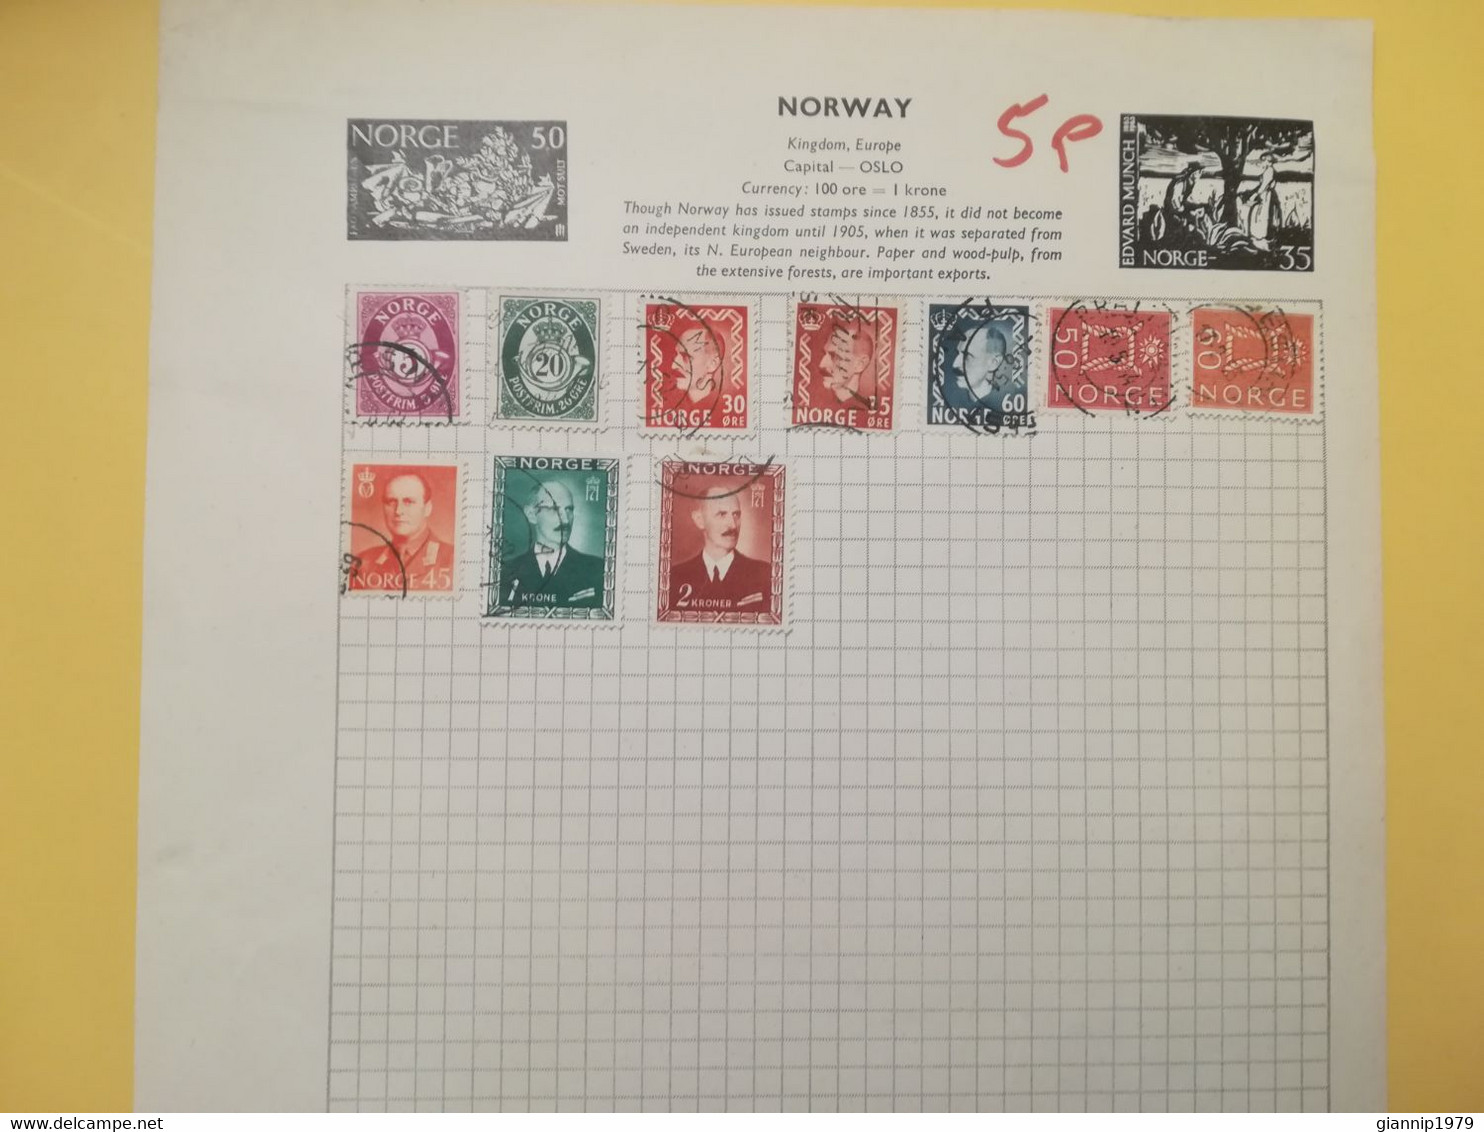 PAGINA PAGE ALBUM NORVEGIA NORGE NORWAY 1921 ATTACCATI PAGE WITH STAMPS COLLEZIONI LOTTO LOT LOTS - Collections